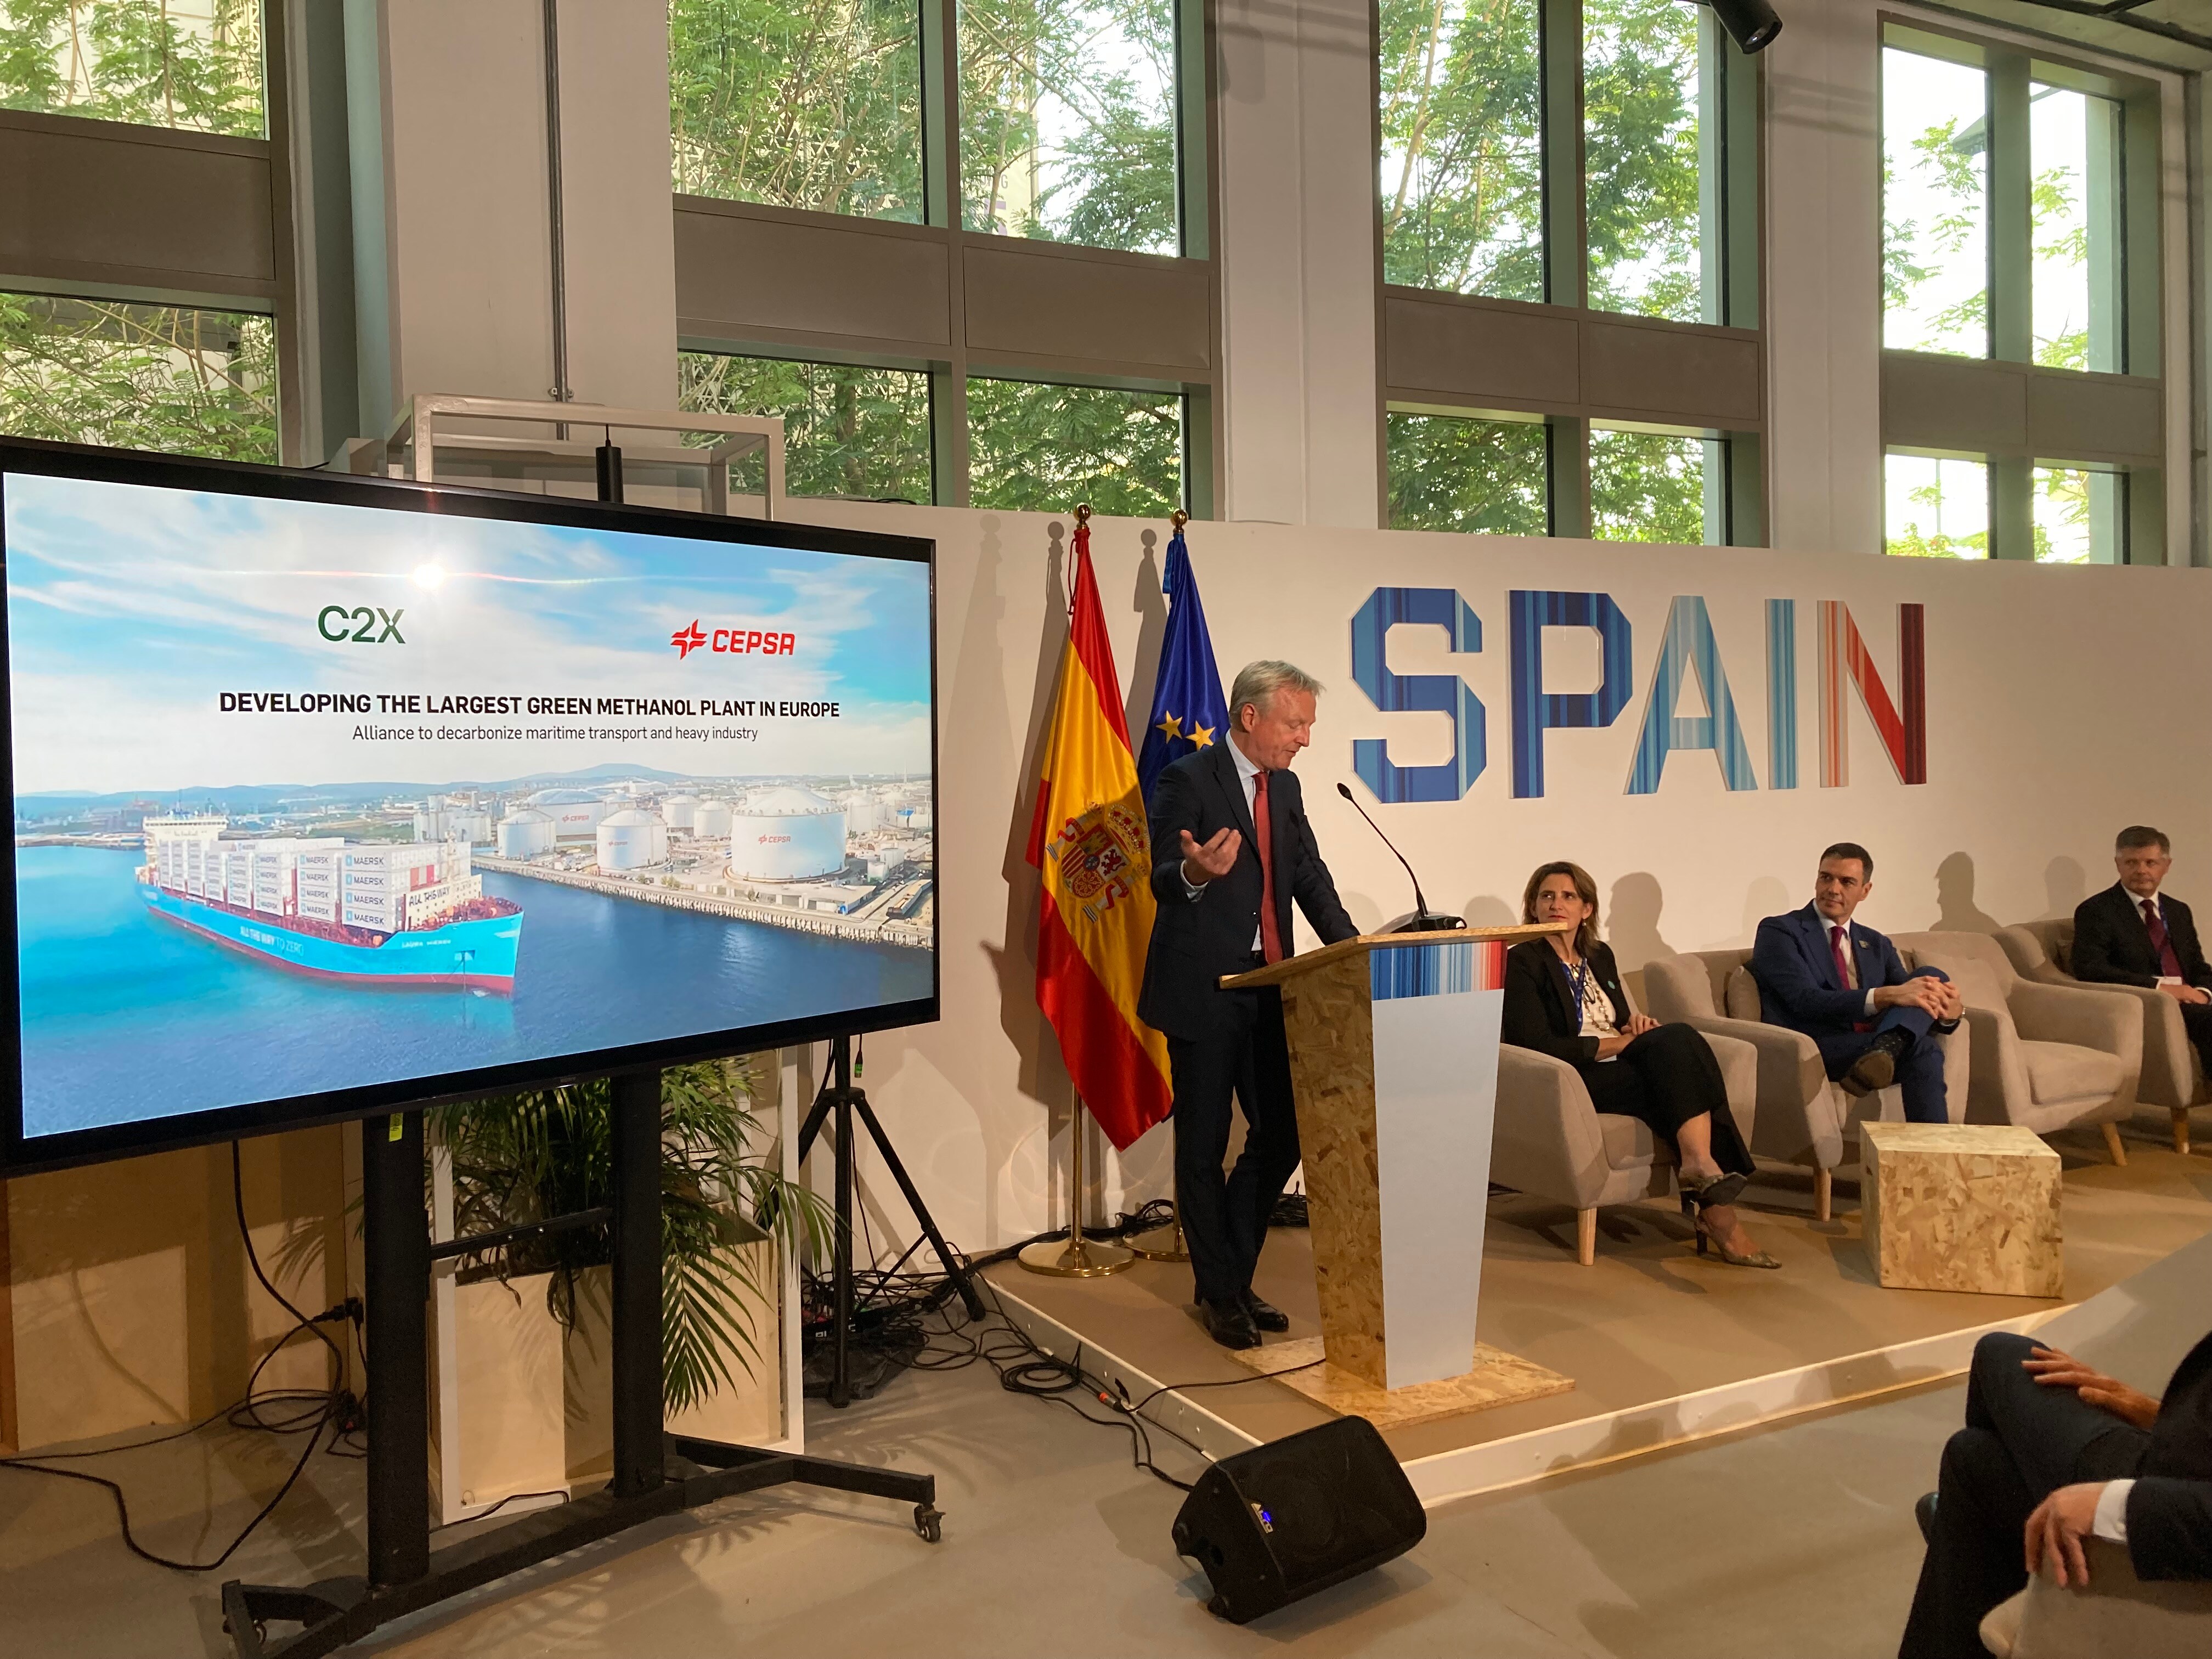 Spain will have the largest green methanol plant in Europe